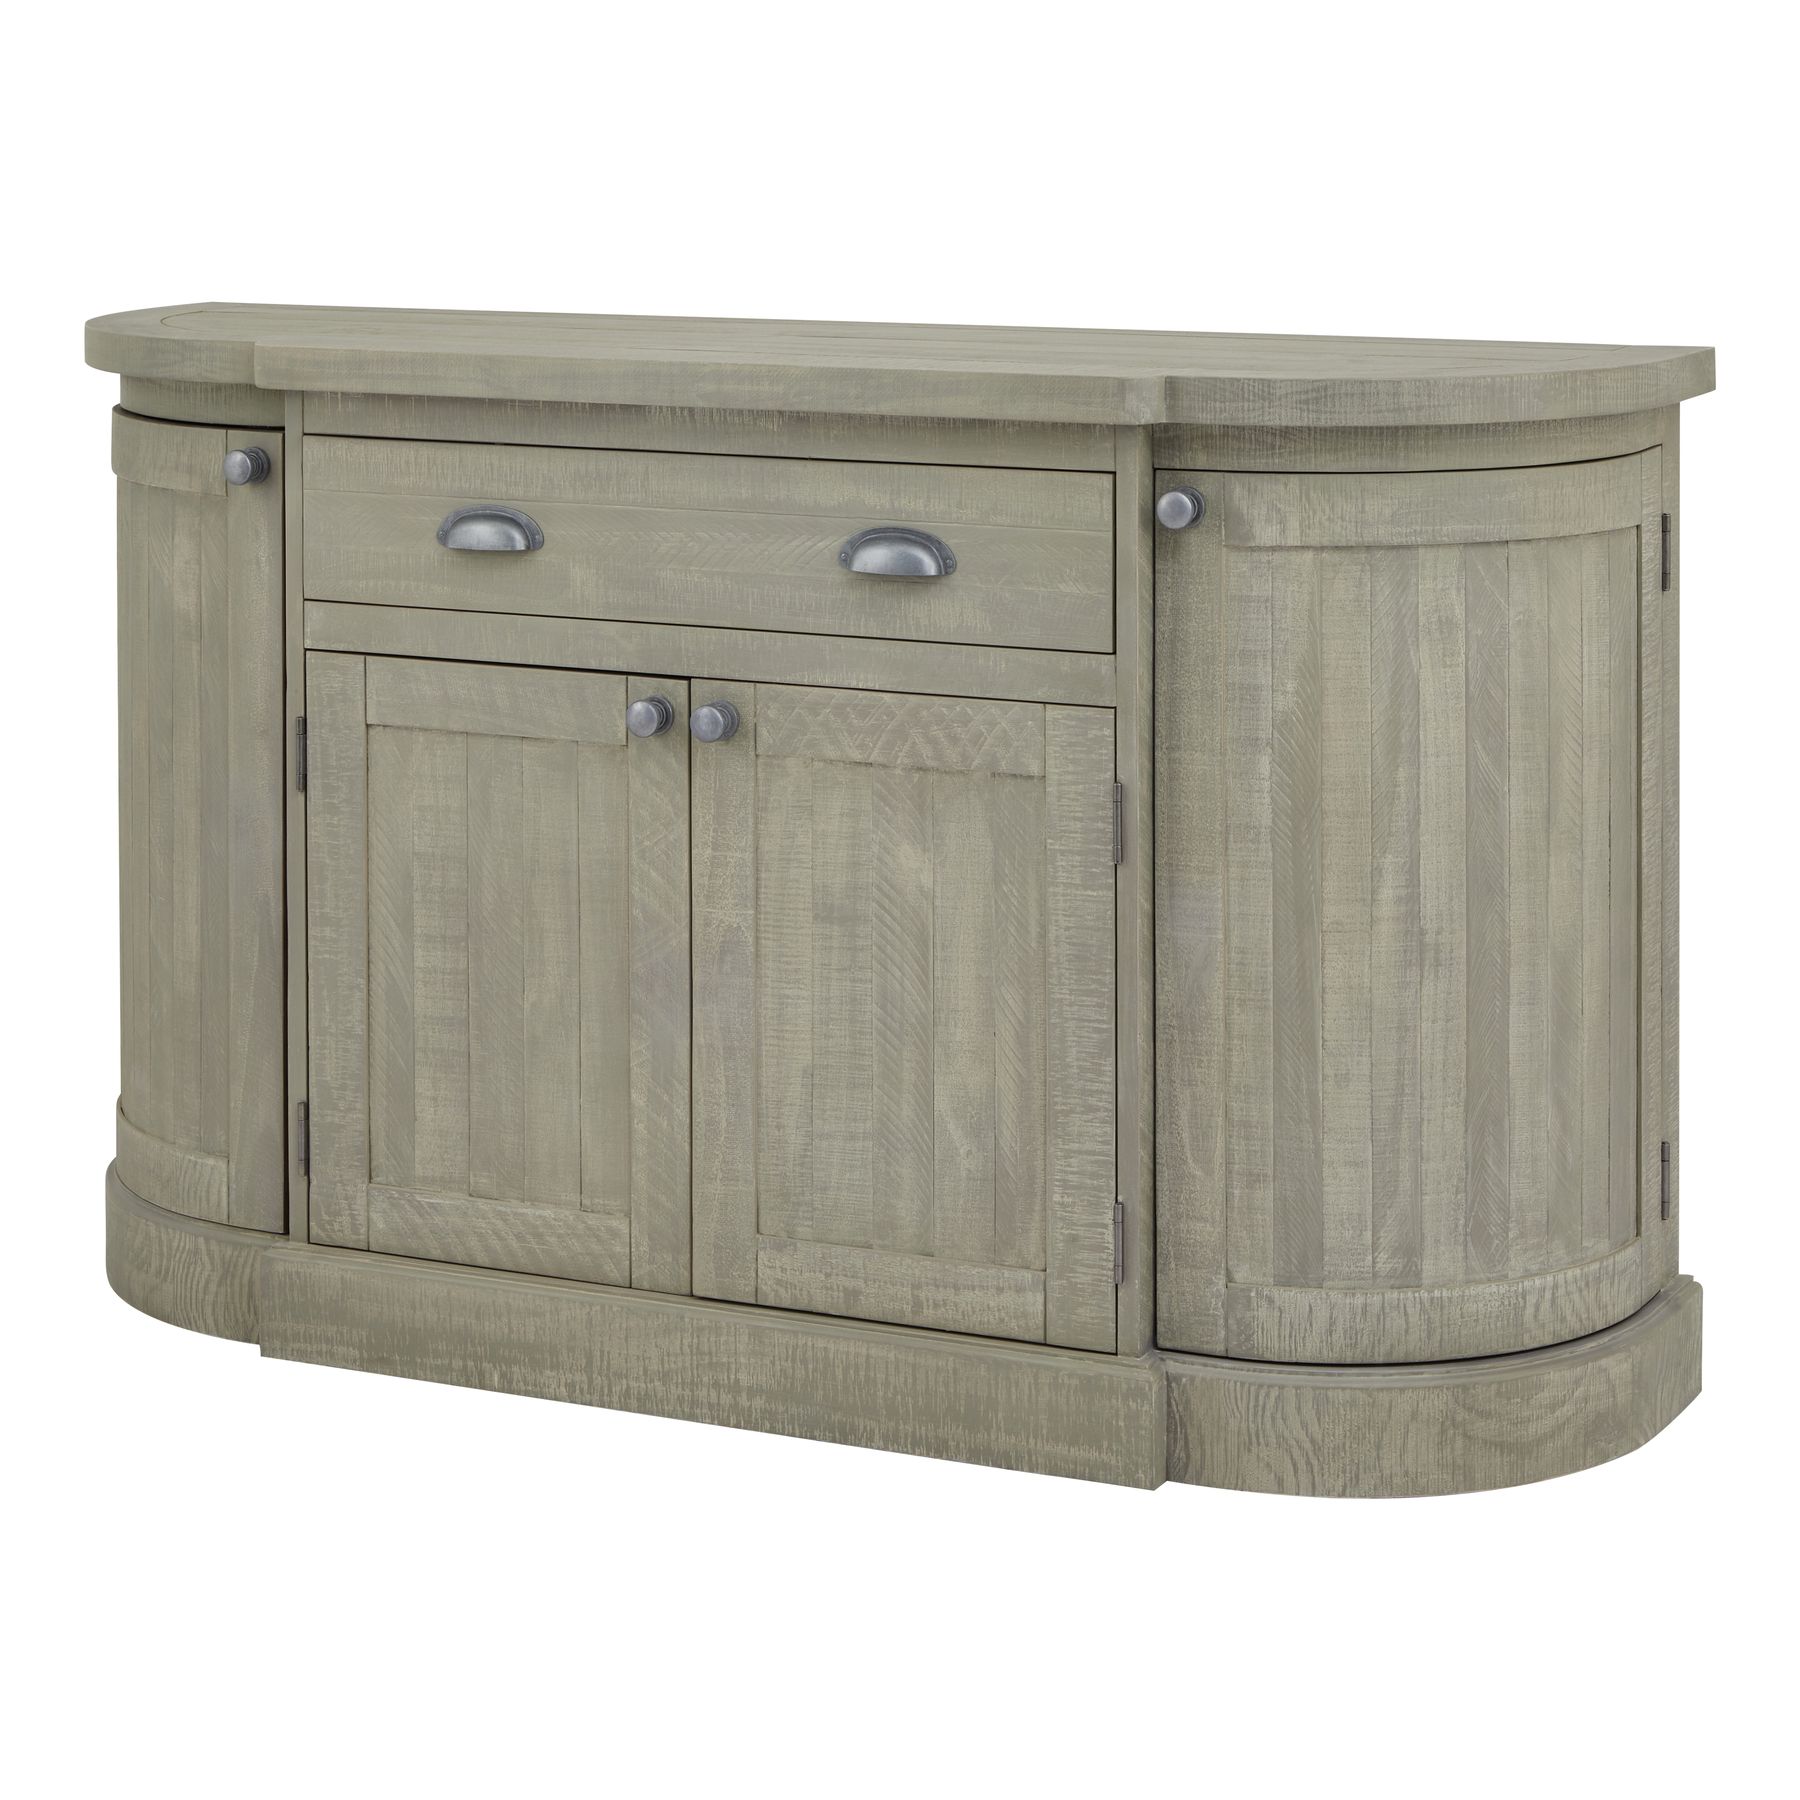 Saltaire Collection 4 Door Sideboard With Drawer - Image 1